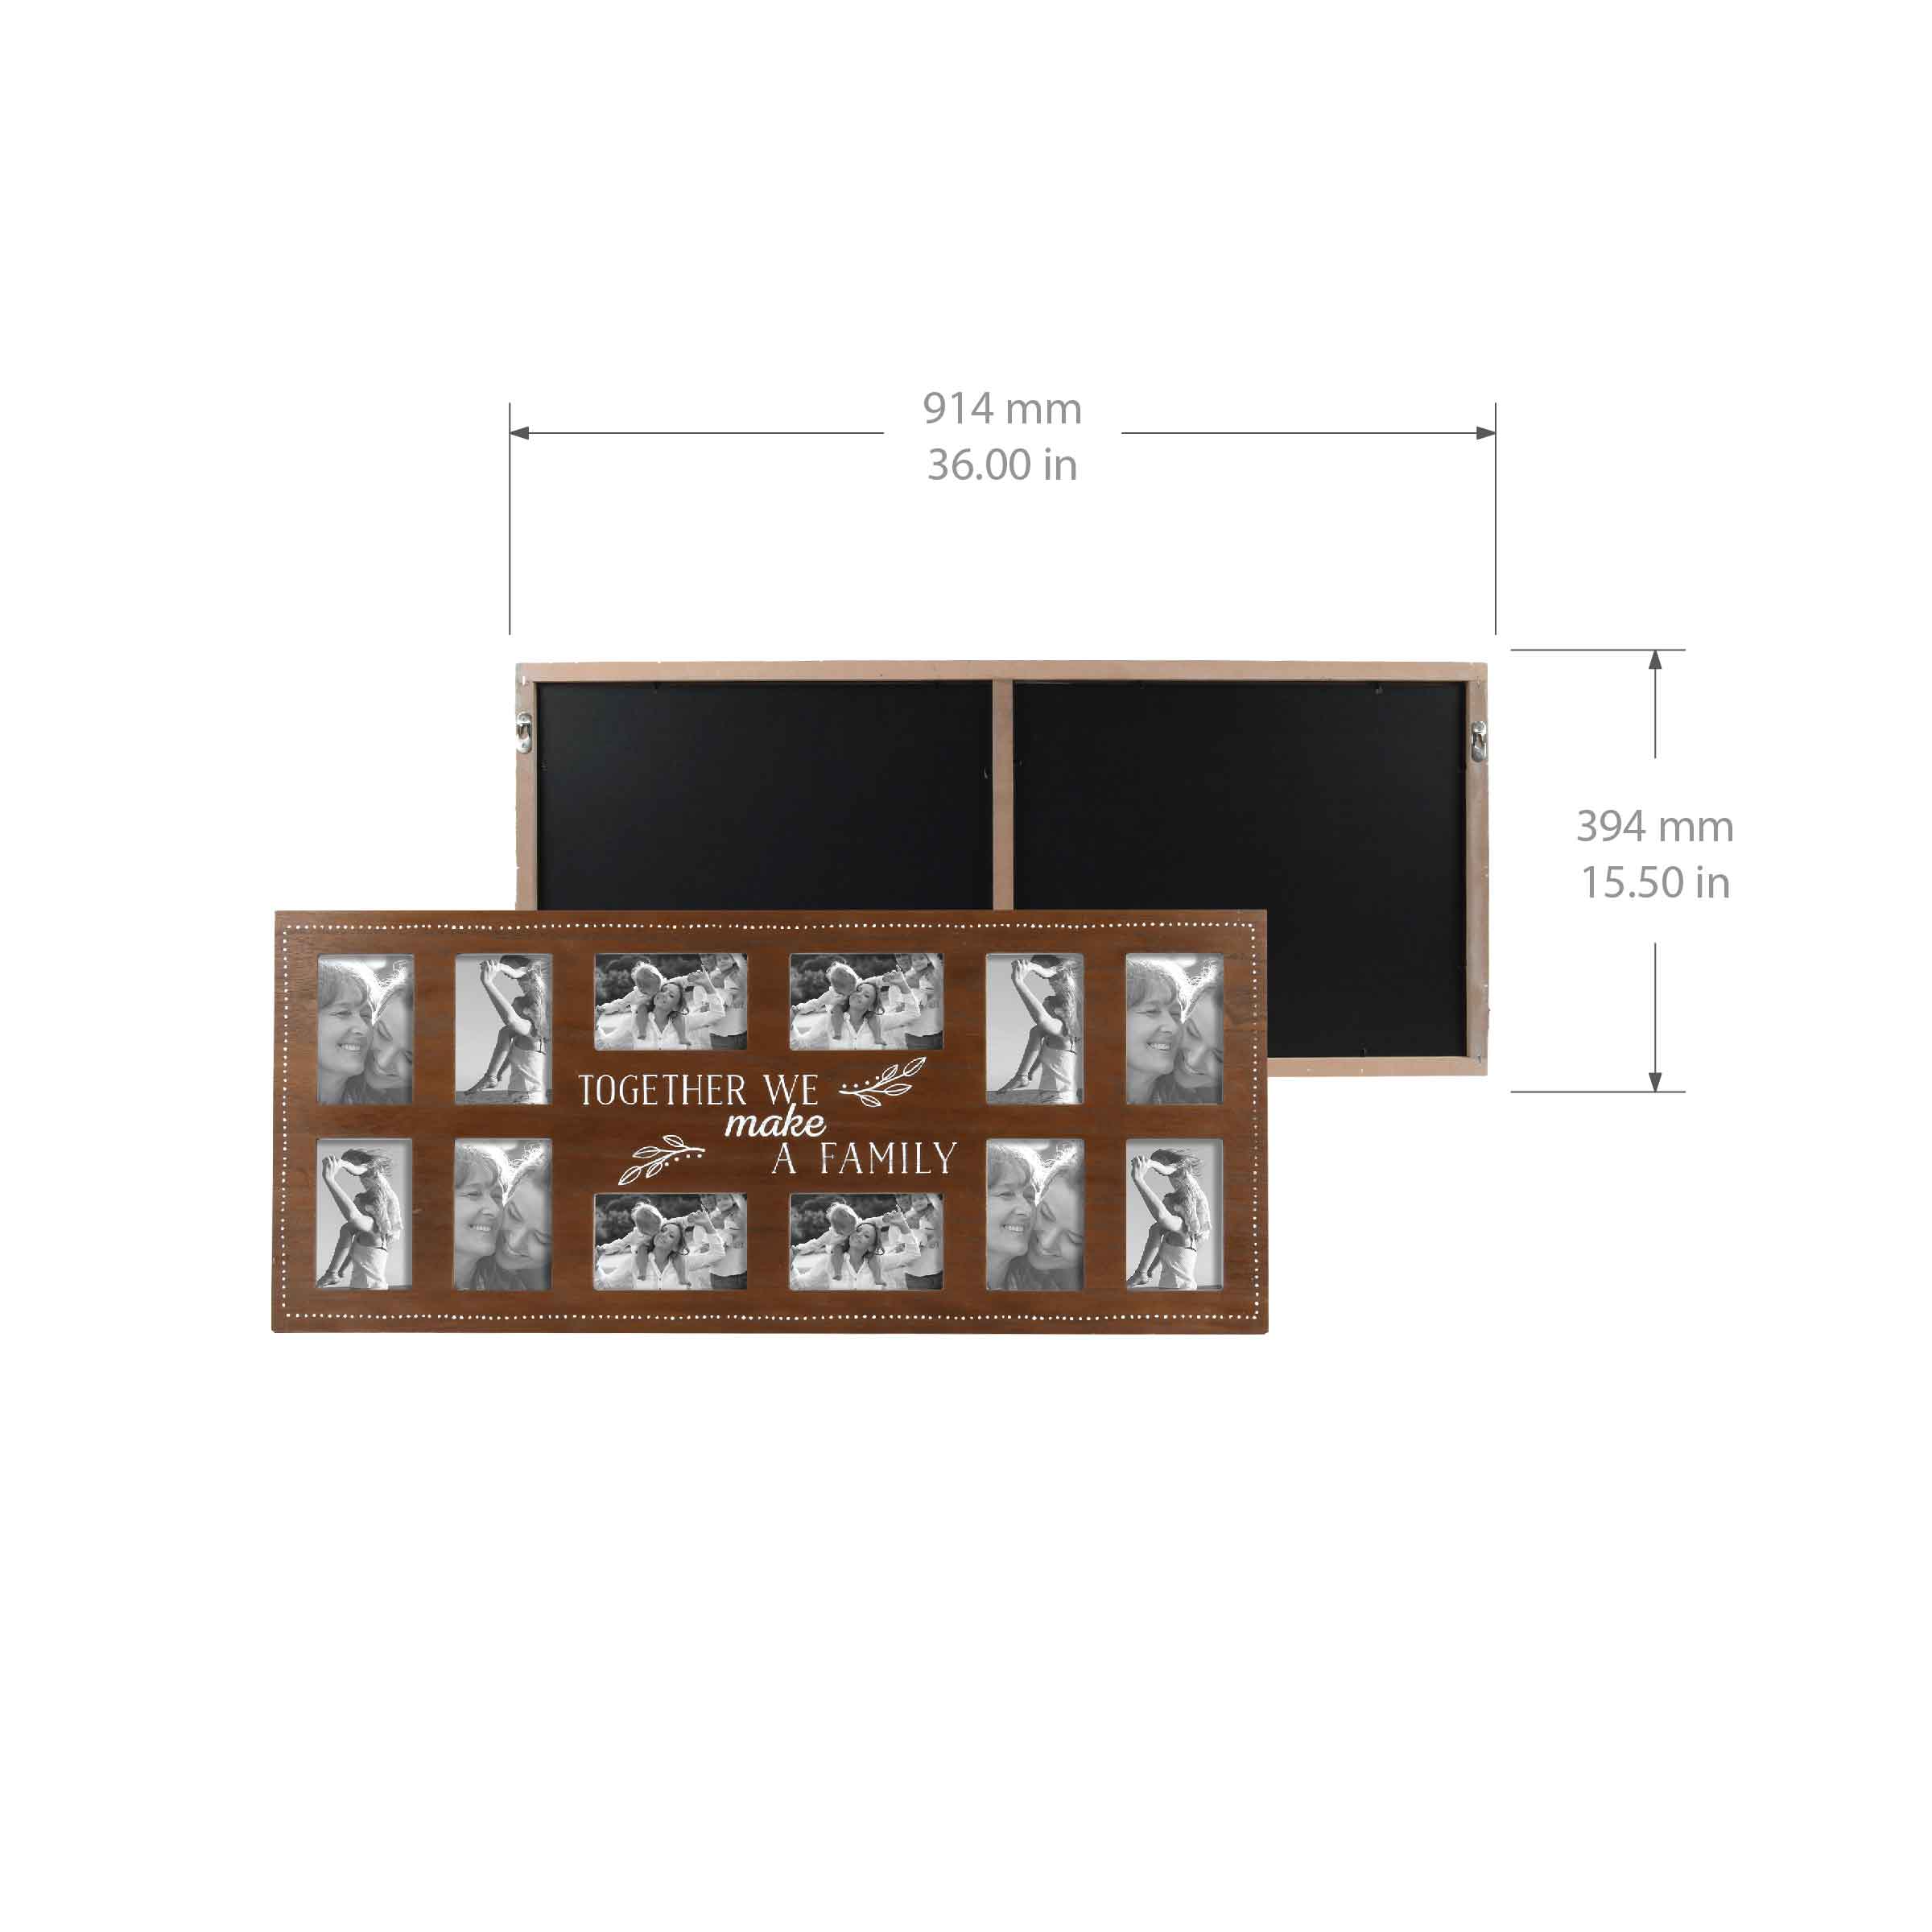 Prinz 12-Opening 'Together' Wall Hanging Collage Picture Frame, for 4"x6" Photos, Dark Brown - image 3 of 5